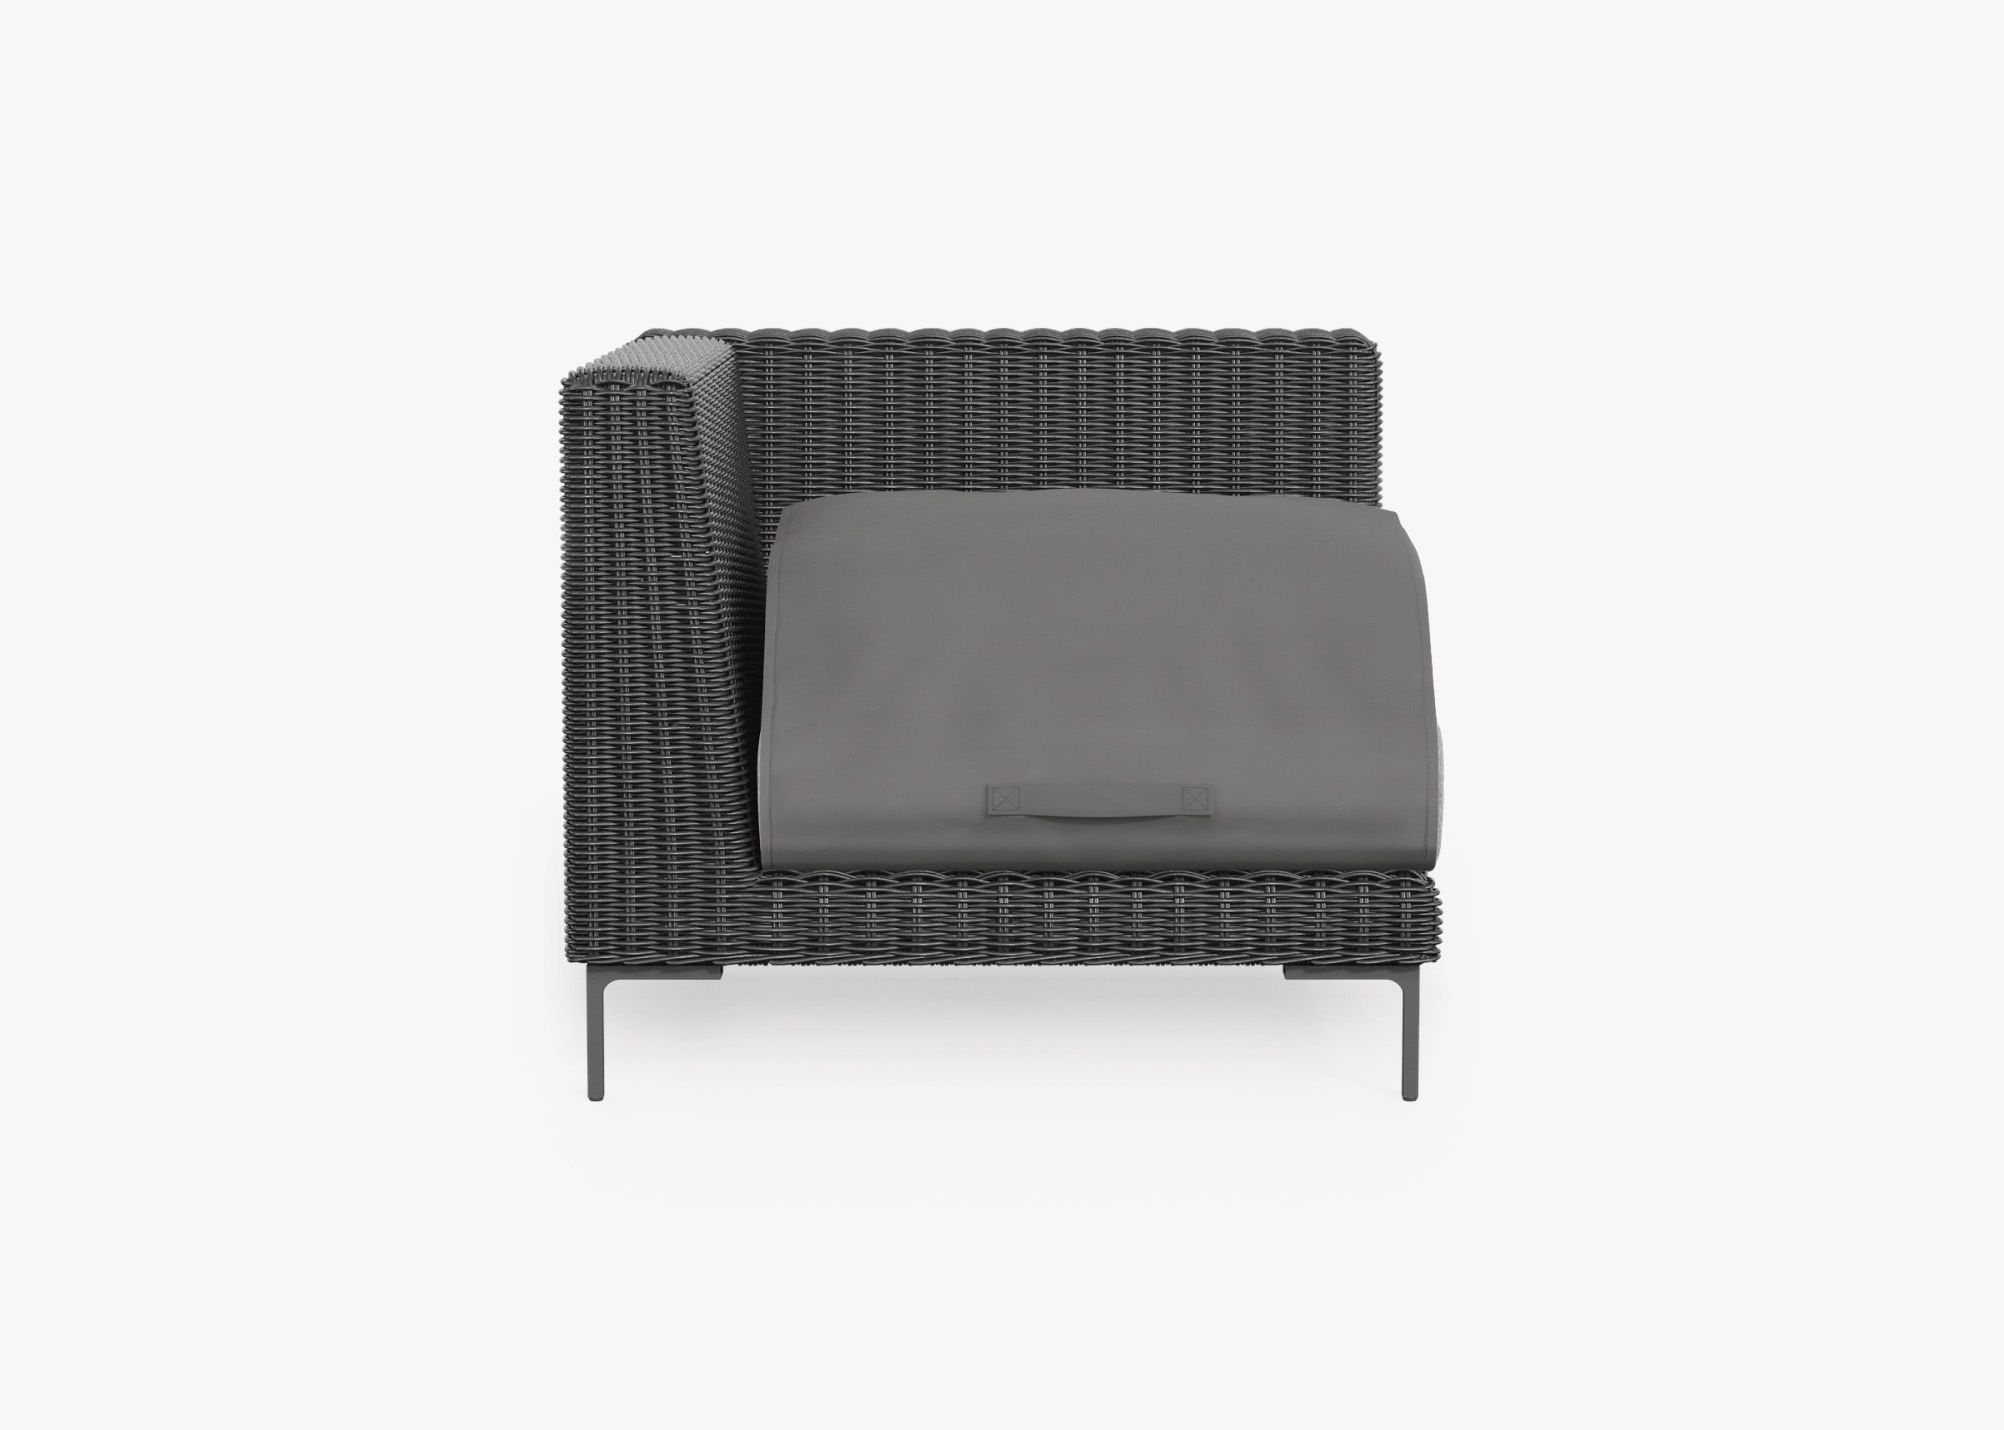 Black Wicker Outdoor Corner Chair - Left/Right shown with the OuterShell outdoor cushion cover, offering exclusive integrated protection.